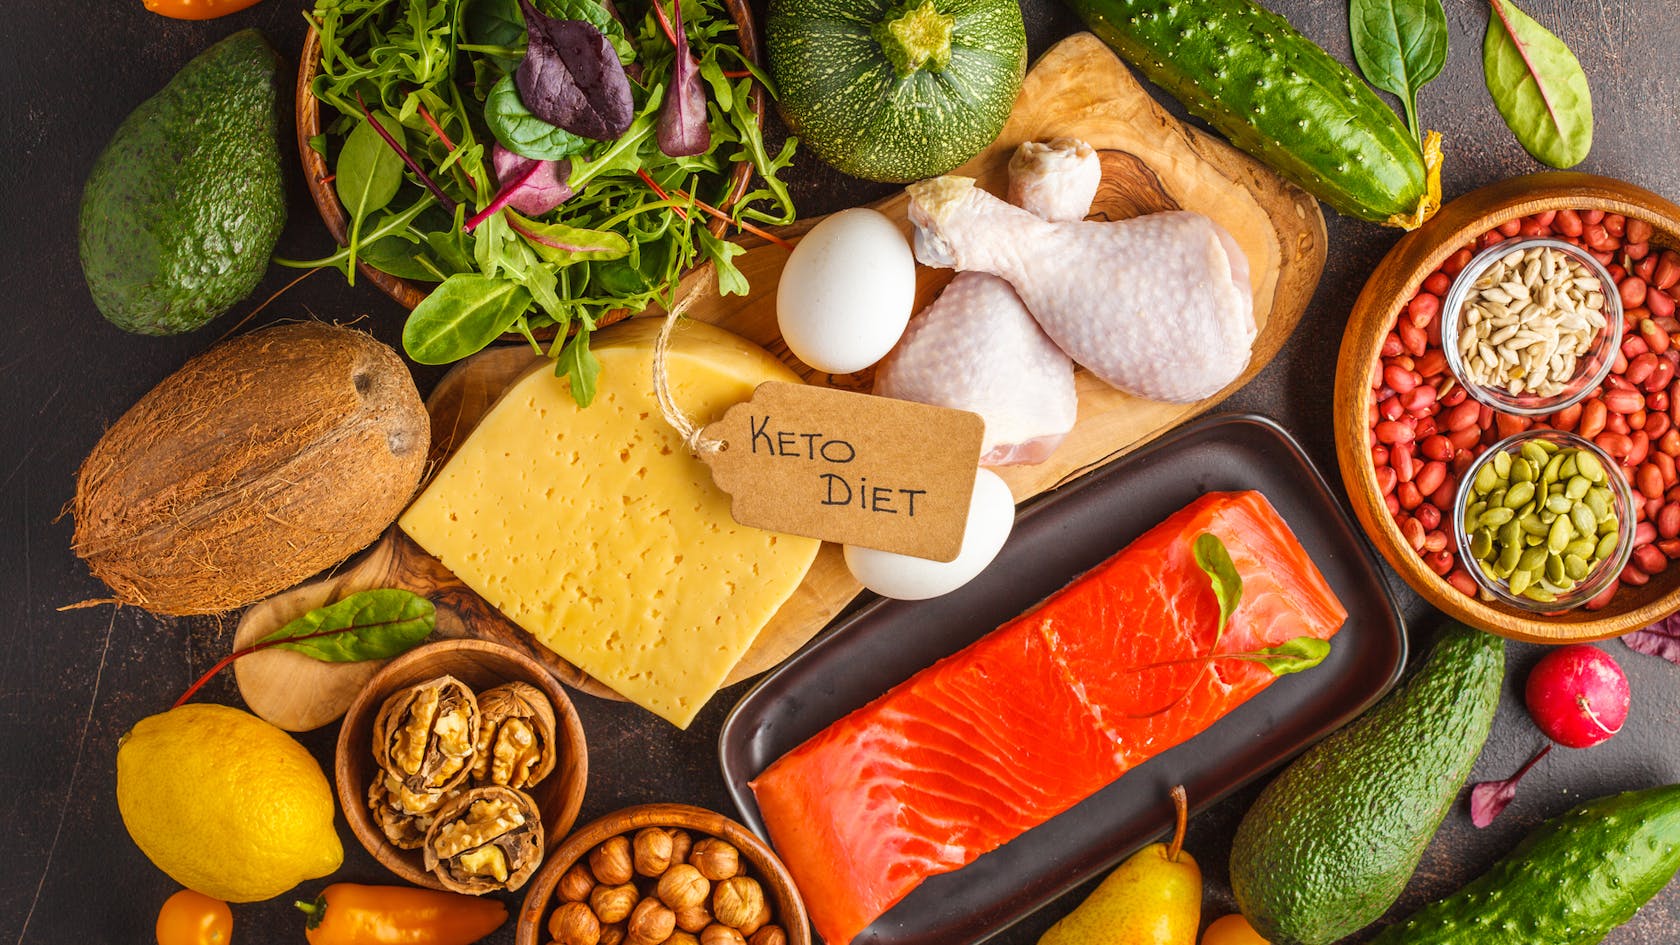 keto diet benefits: Keto diet isn't that healthy, after all: Ketosis brings  short-term benefits, can cause harm in long run - The Economic Times